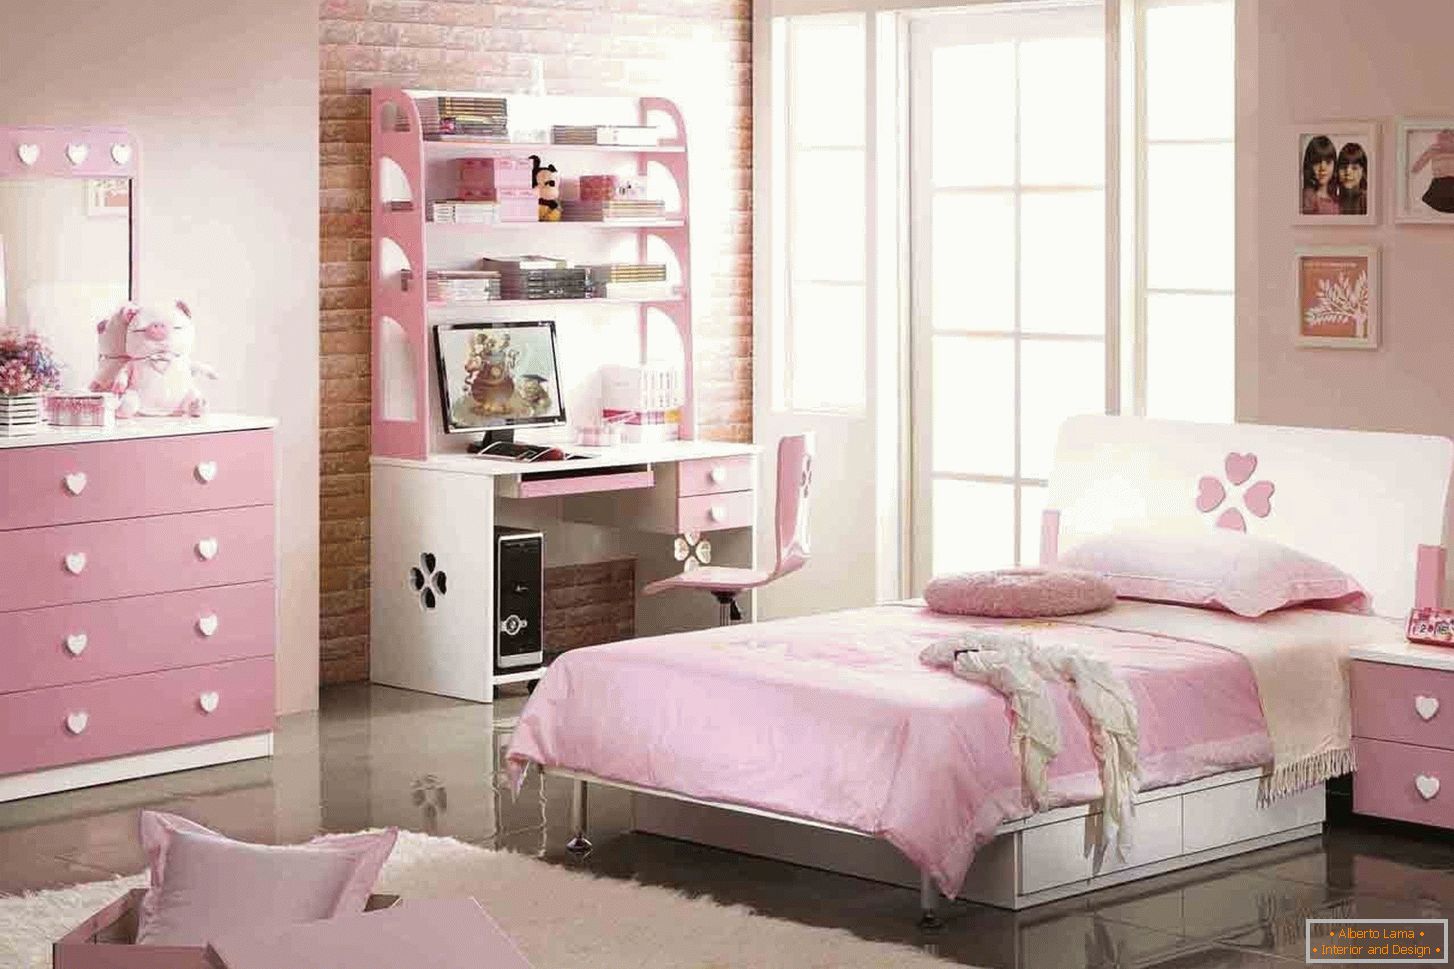 Design of a bedroom for a teenager in pink color